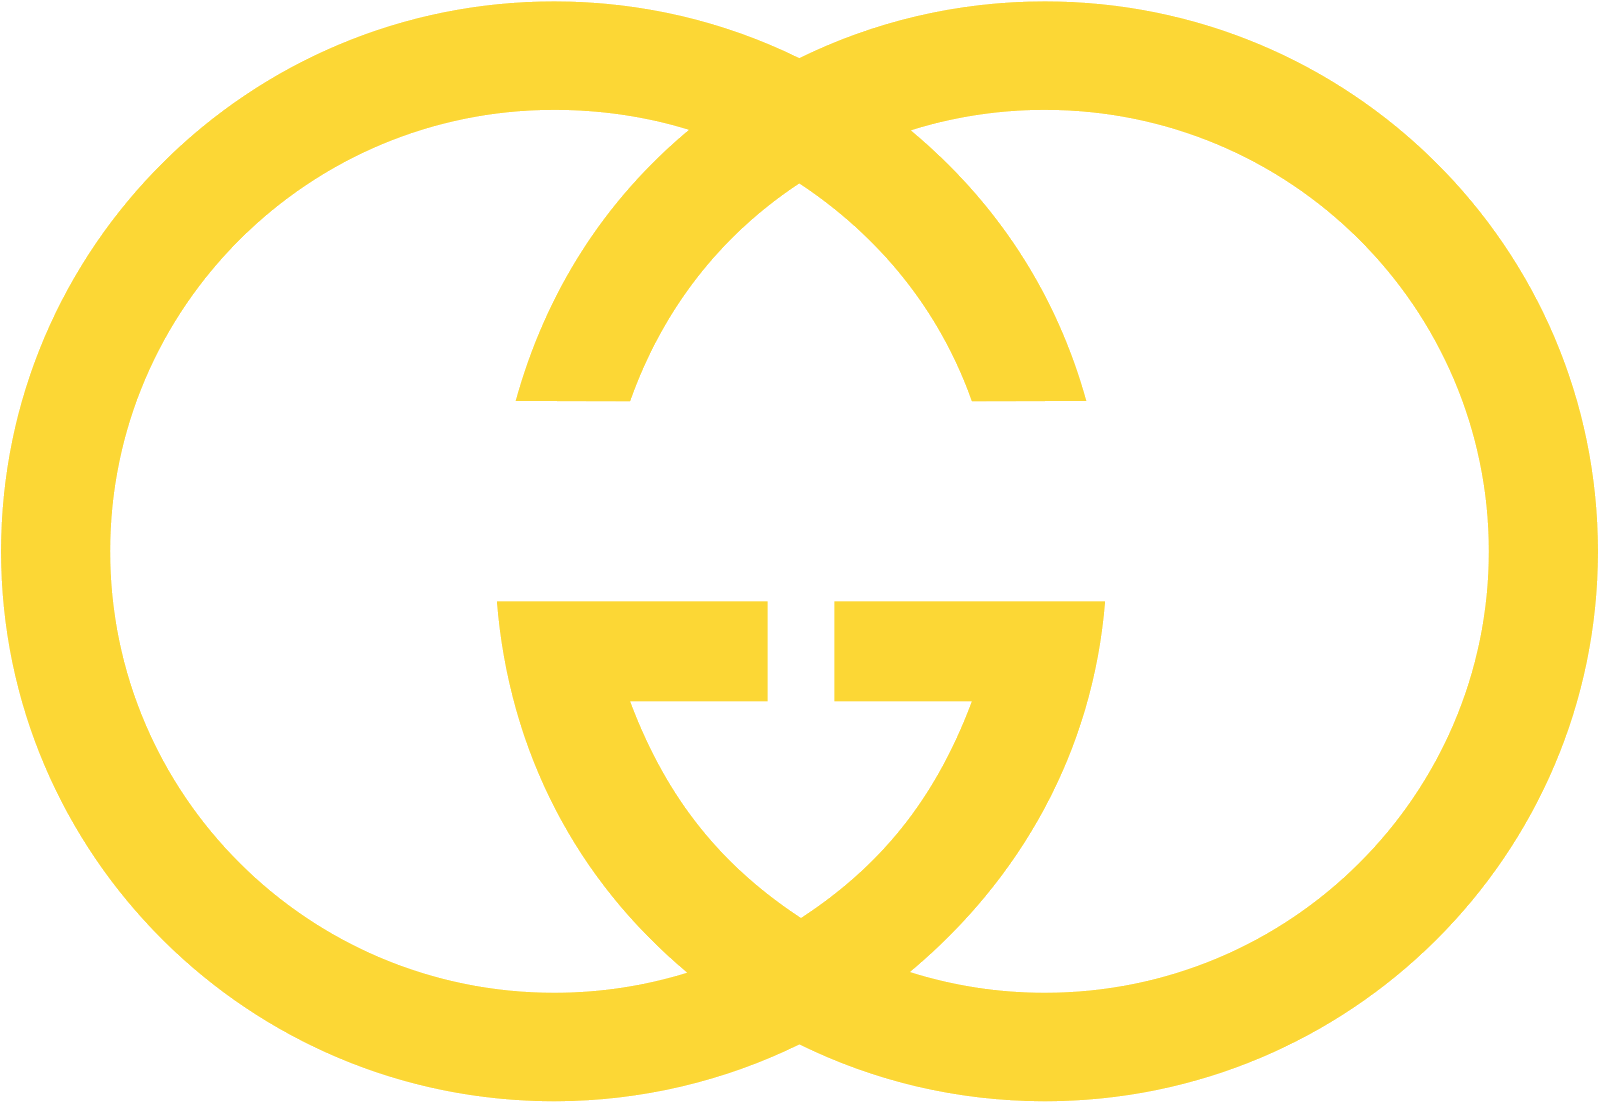 Gucci Logo PNG Images Transparent Background | PNG Play